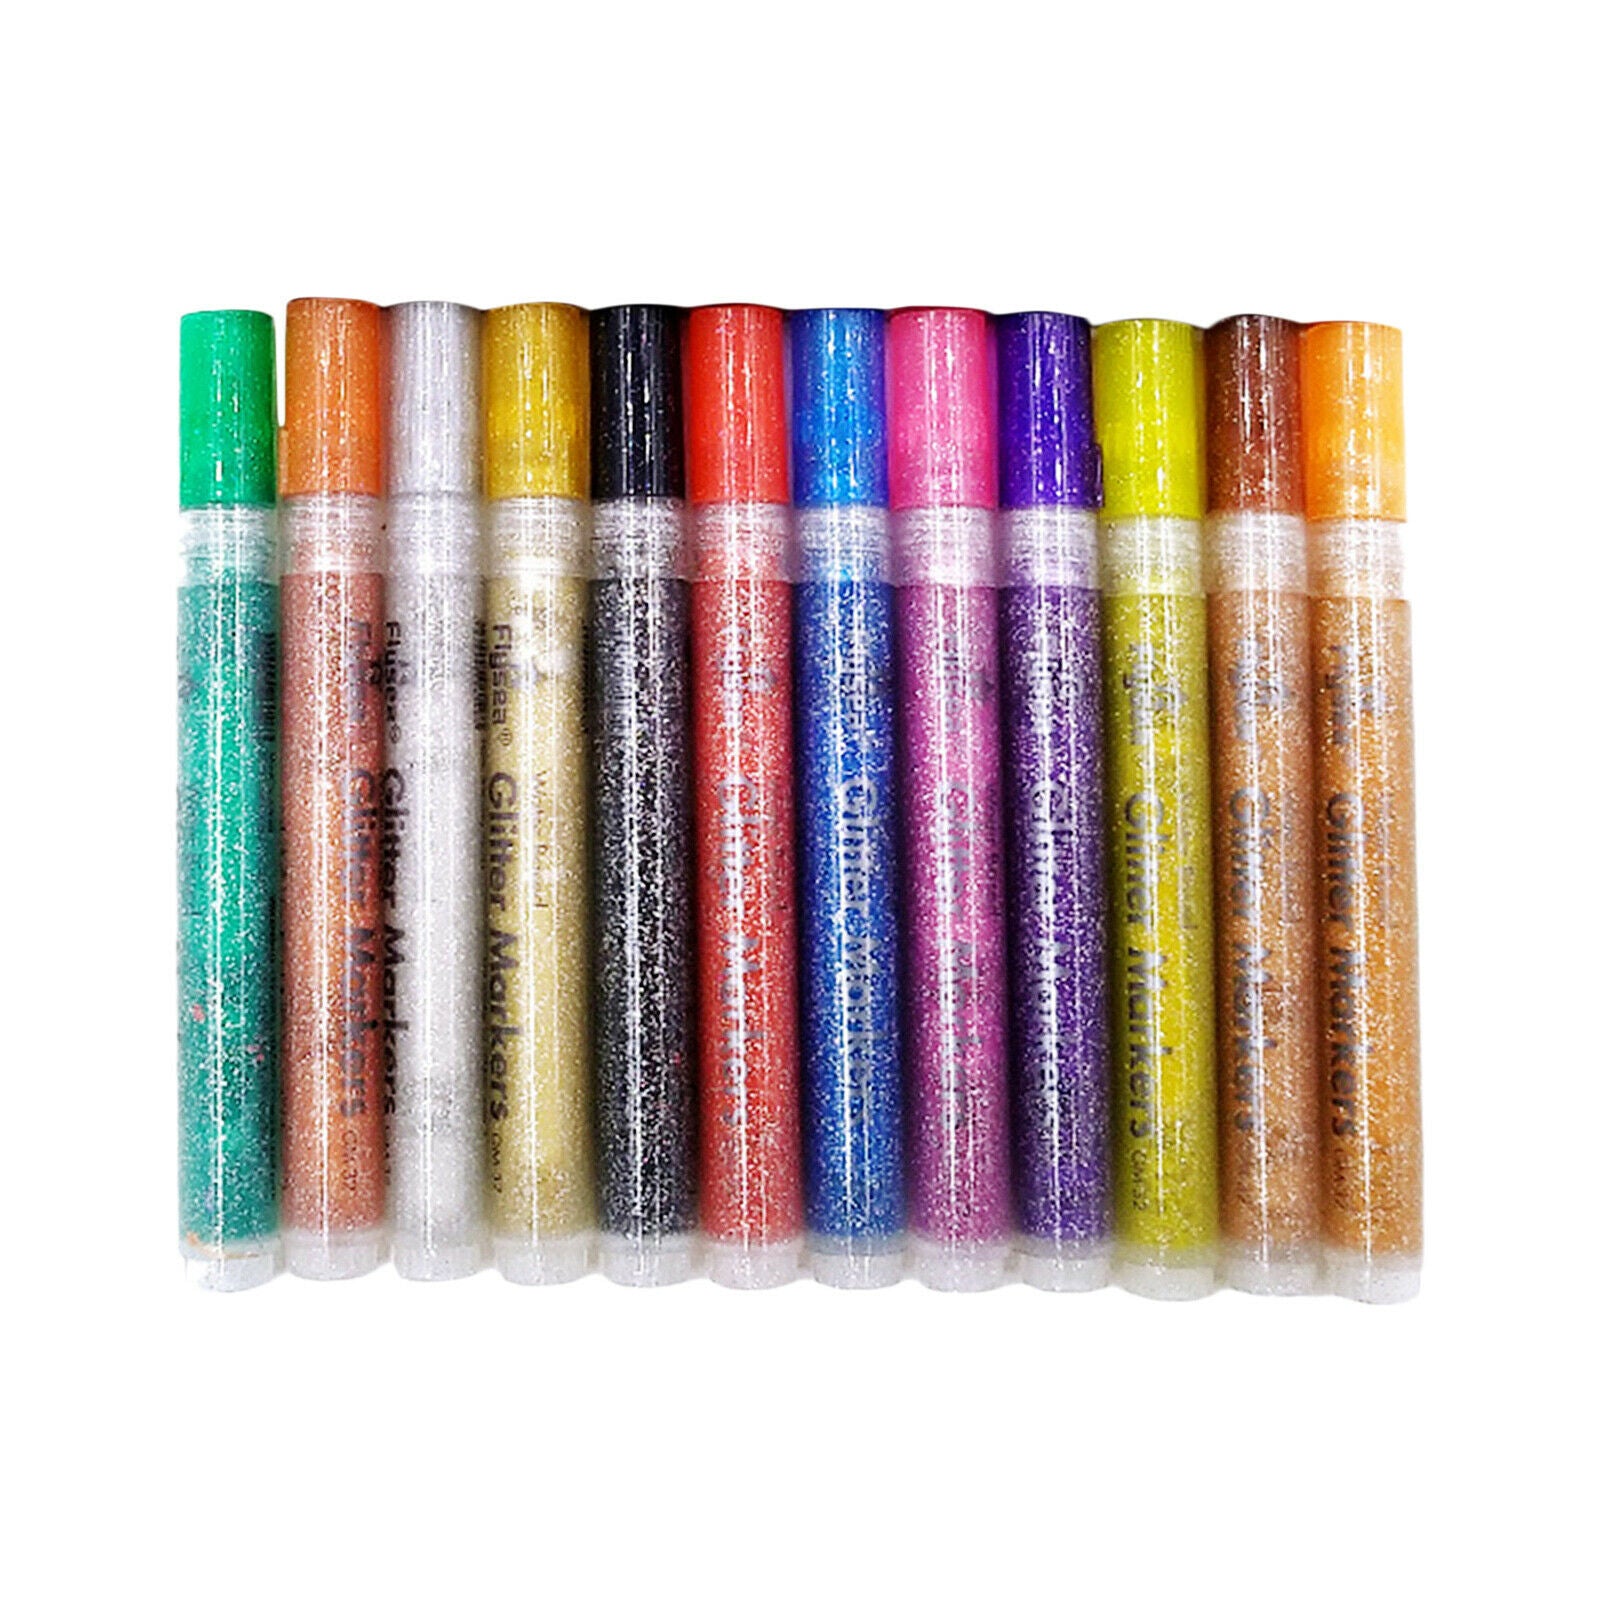 12x Colorful Permanent Metallic Markers Glitter Paint Pens Set for Art Craft